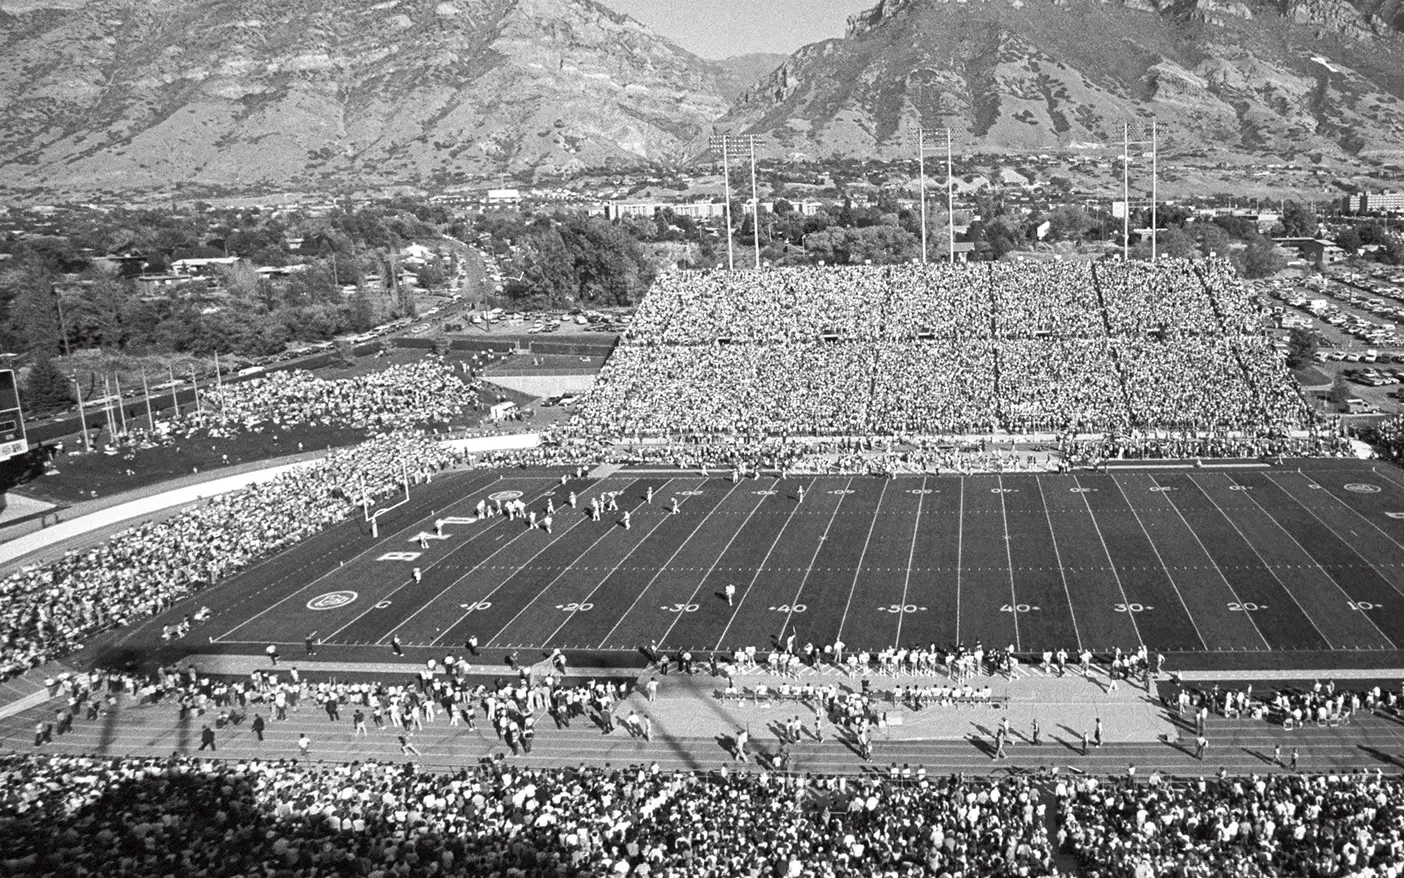 A vintage photo of LaVell Edwards Stadium during a football game in the early 80s.